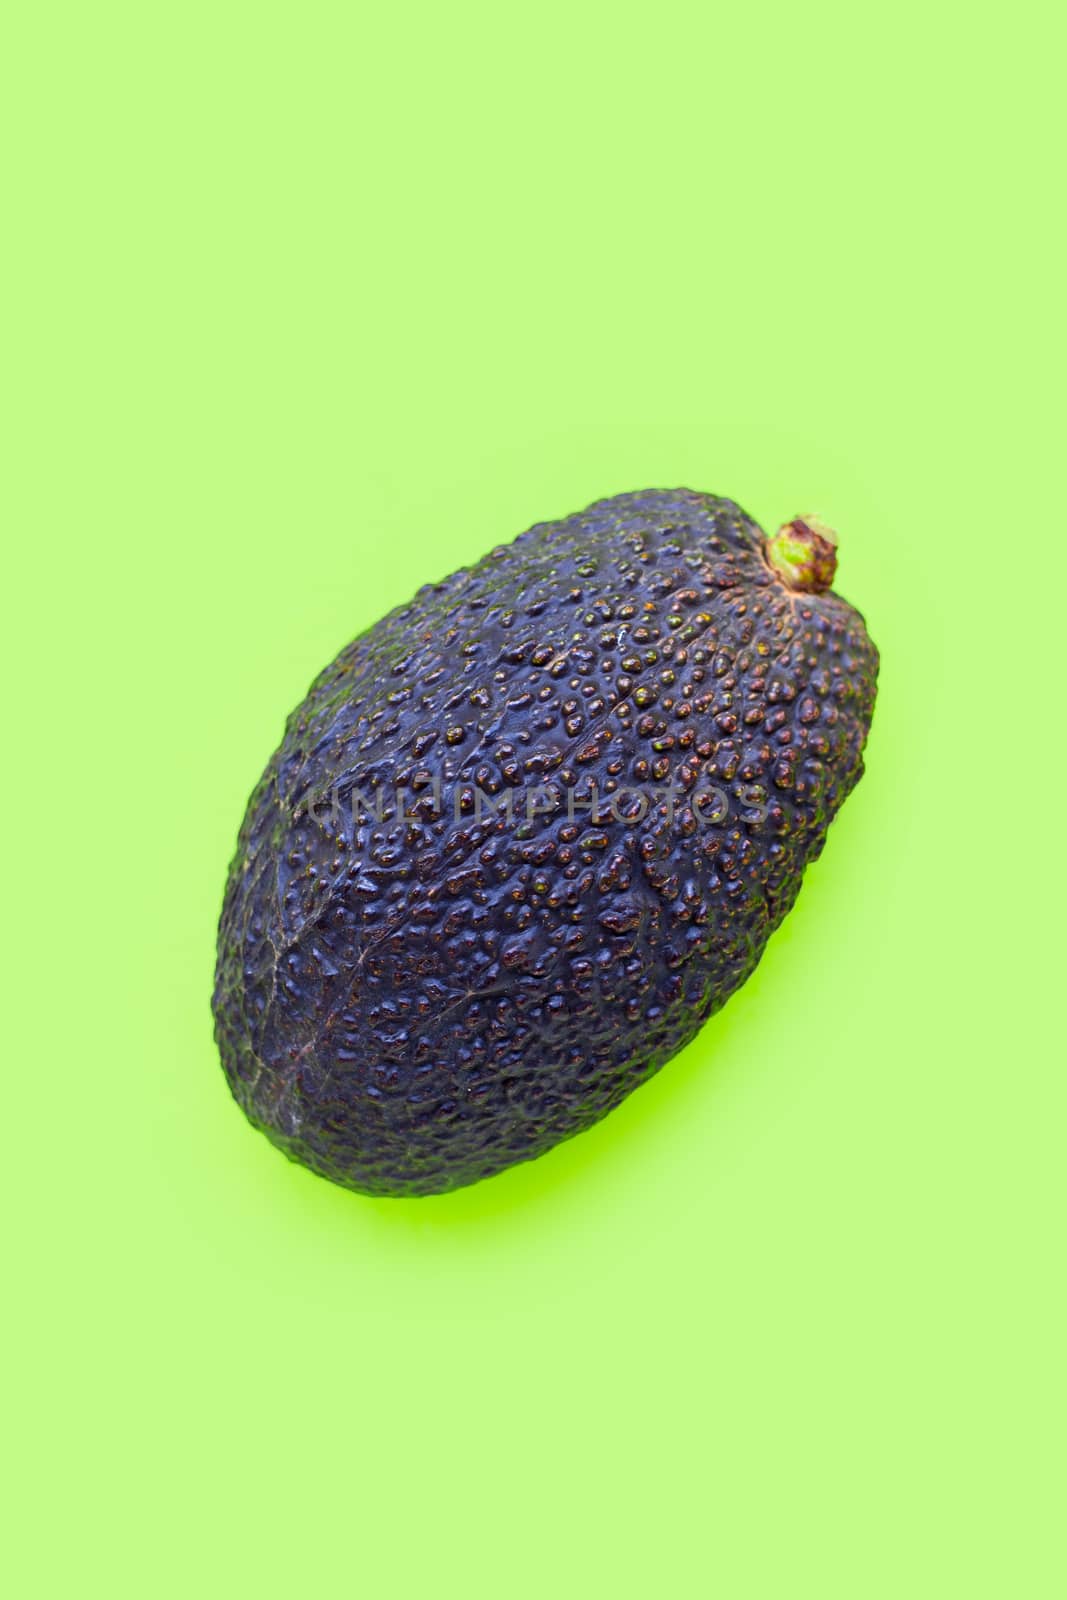 Avocado on green background.  by Bowonpat